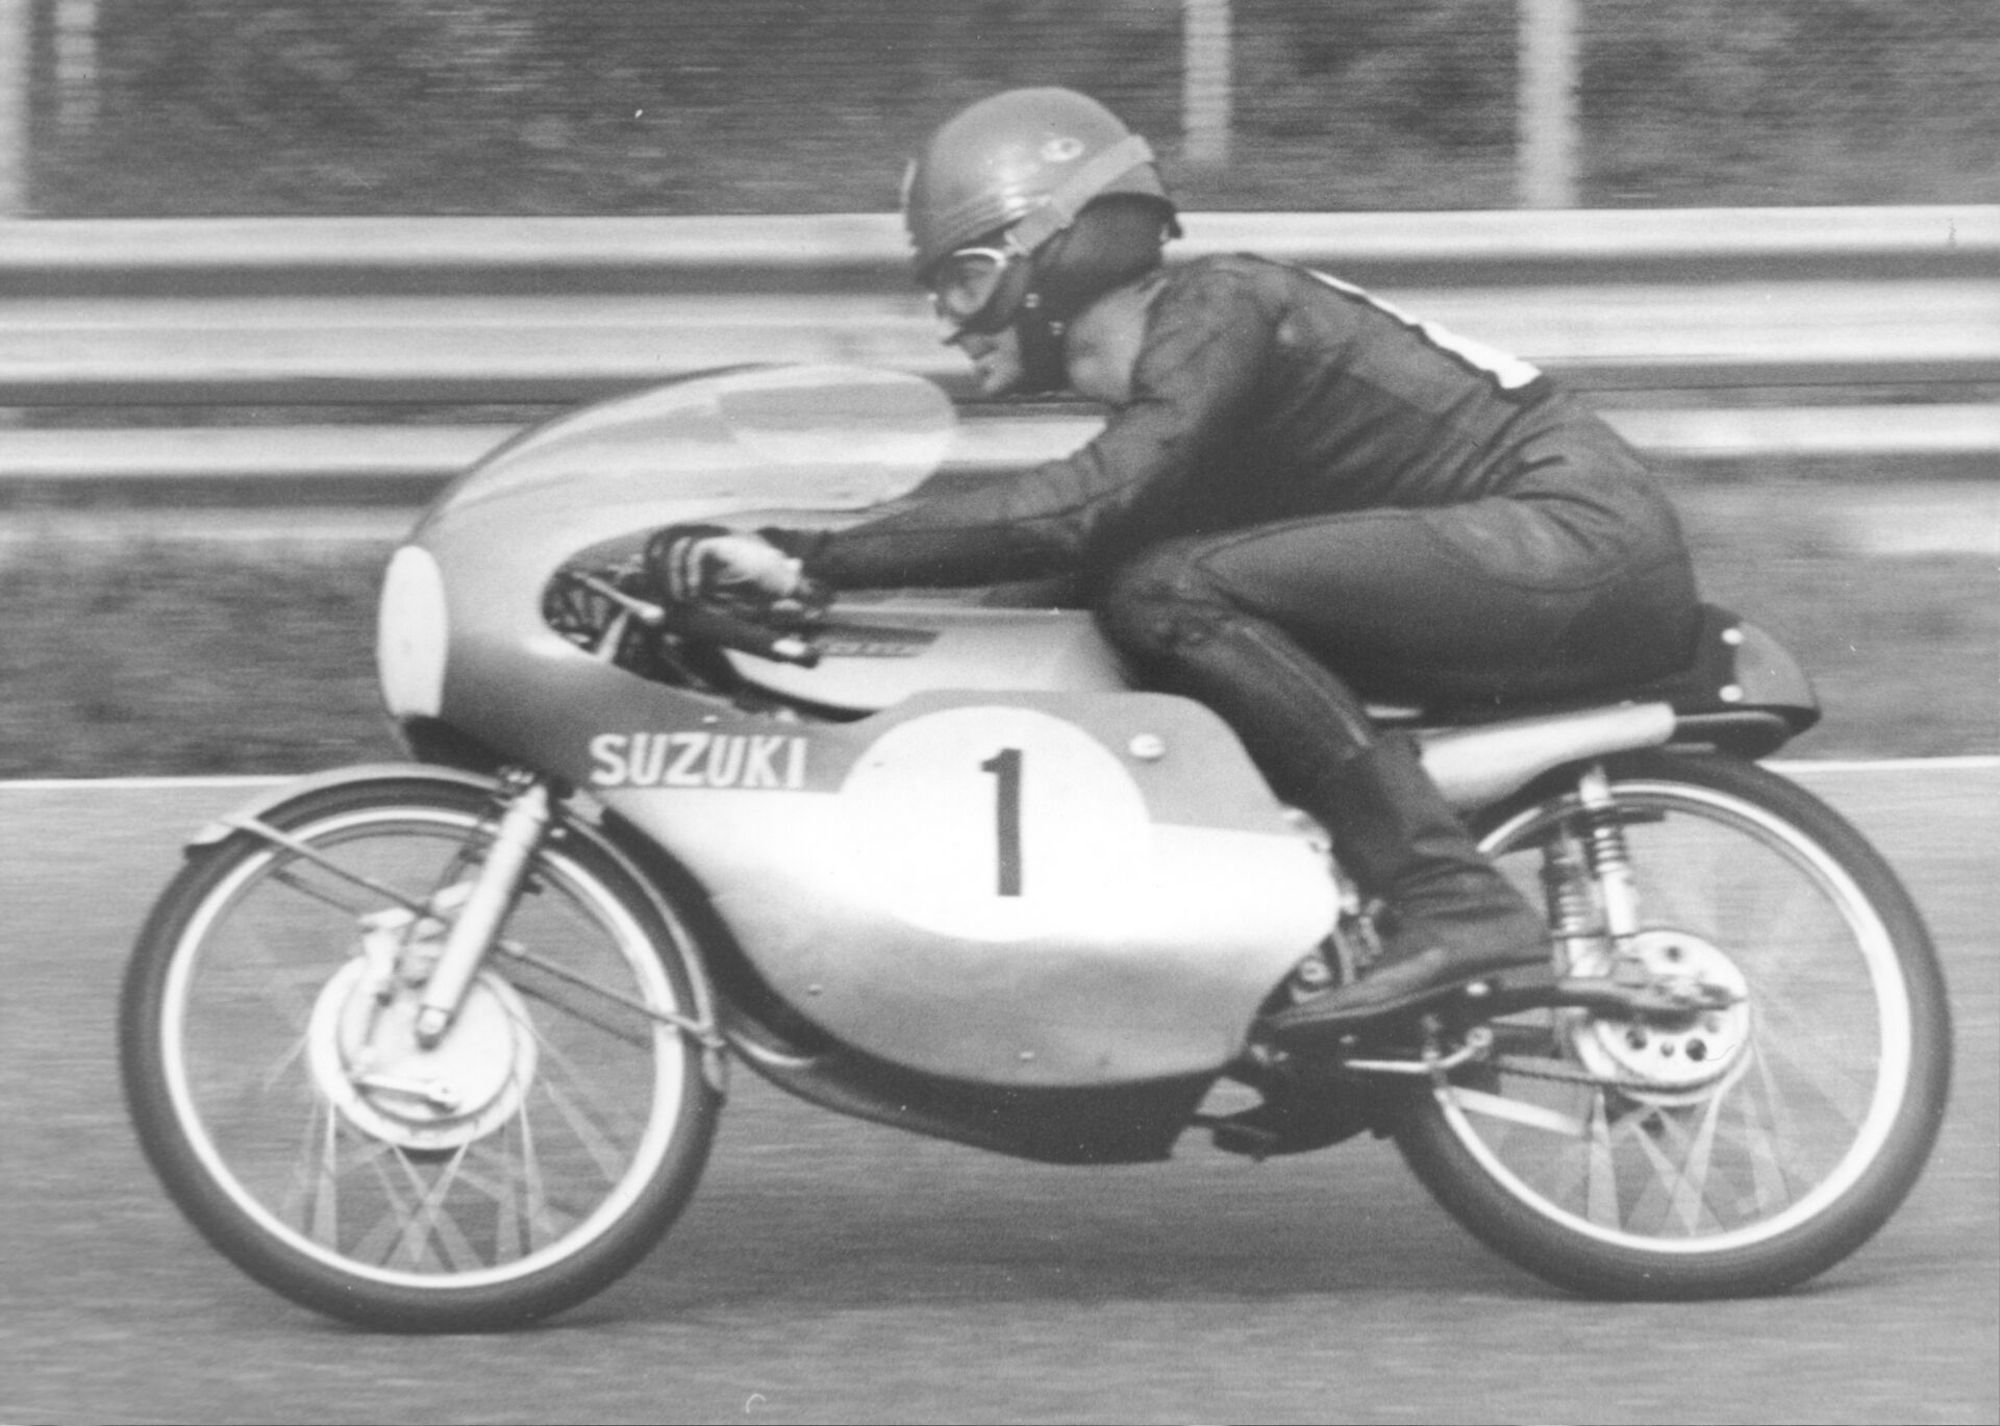 Hugh Anderson, during his younger years of professional hooning in the name of MotoGP history. Media sourced from Roadracing World.